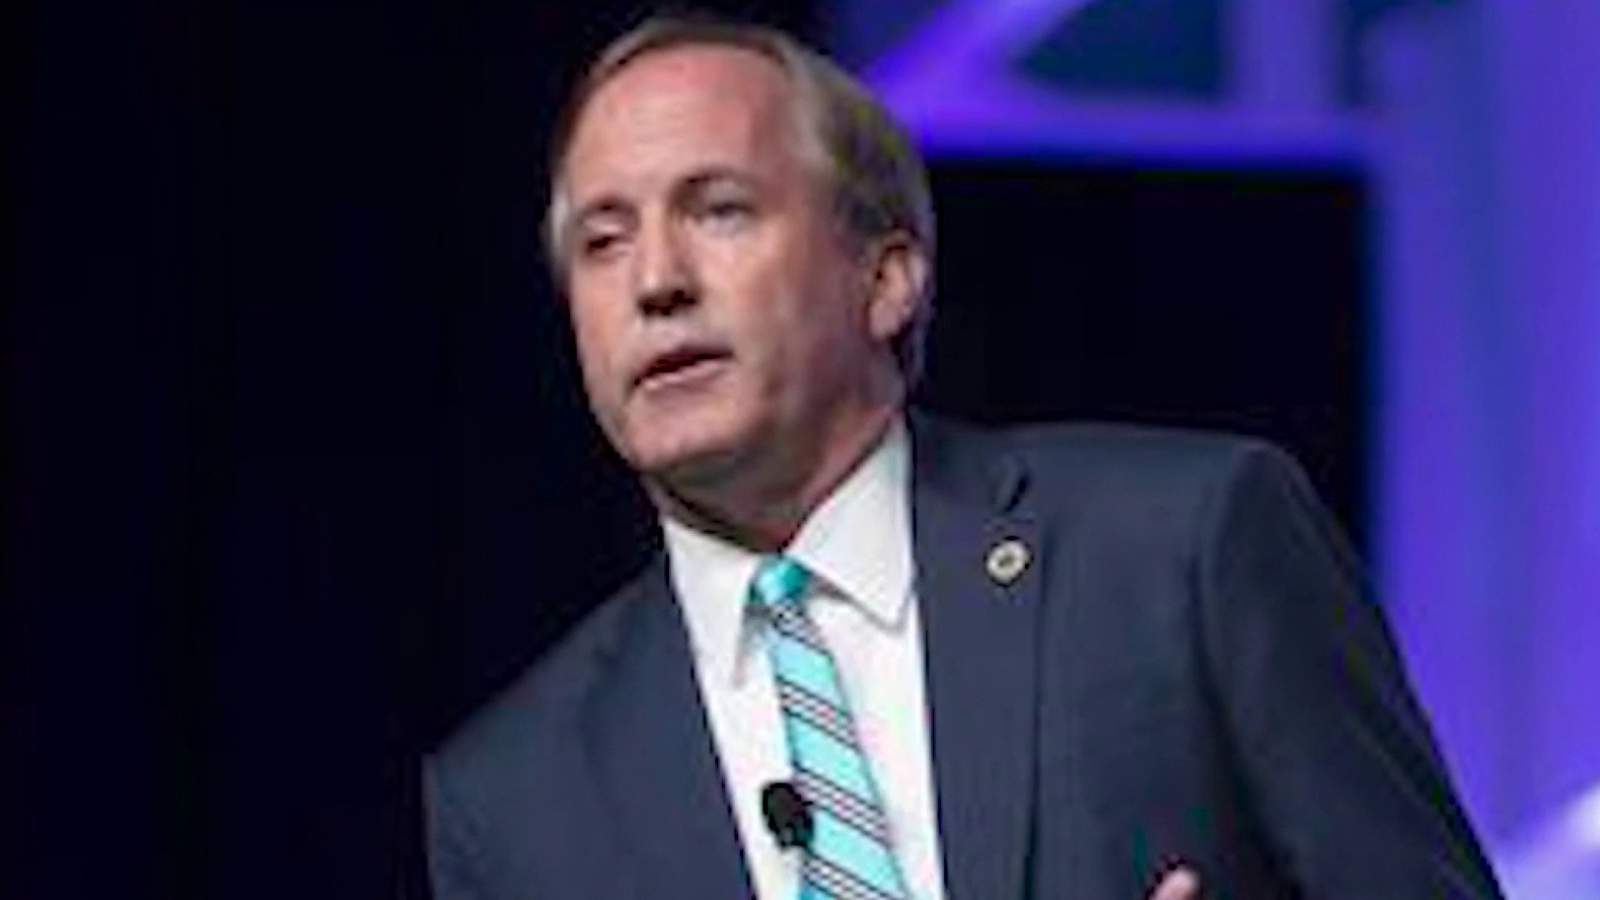 Appeals court grants Ken Paxton’s request for stay of district court override